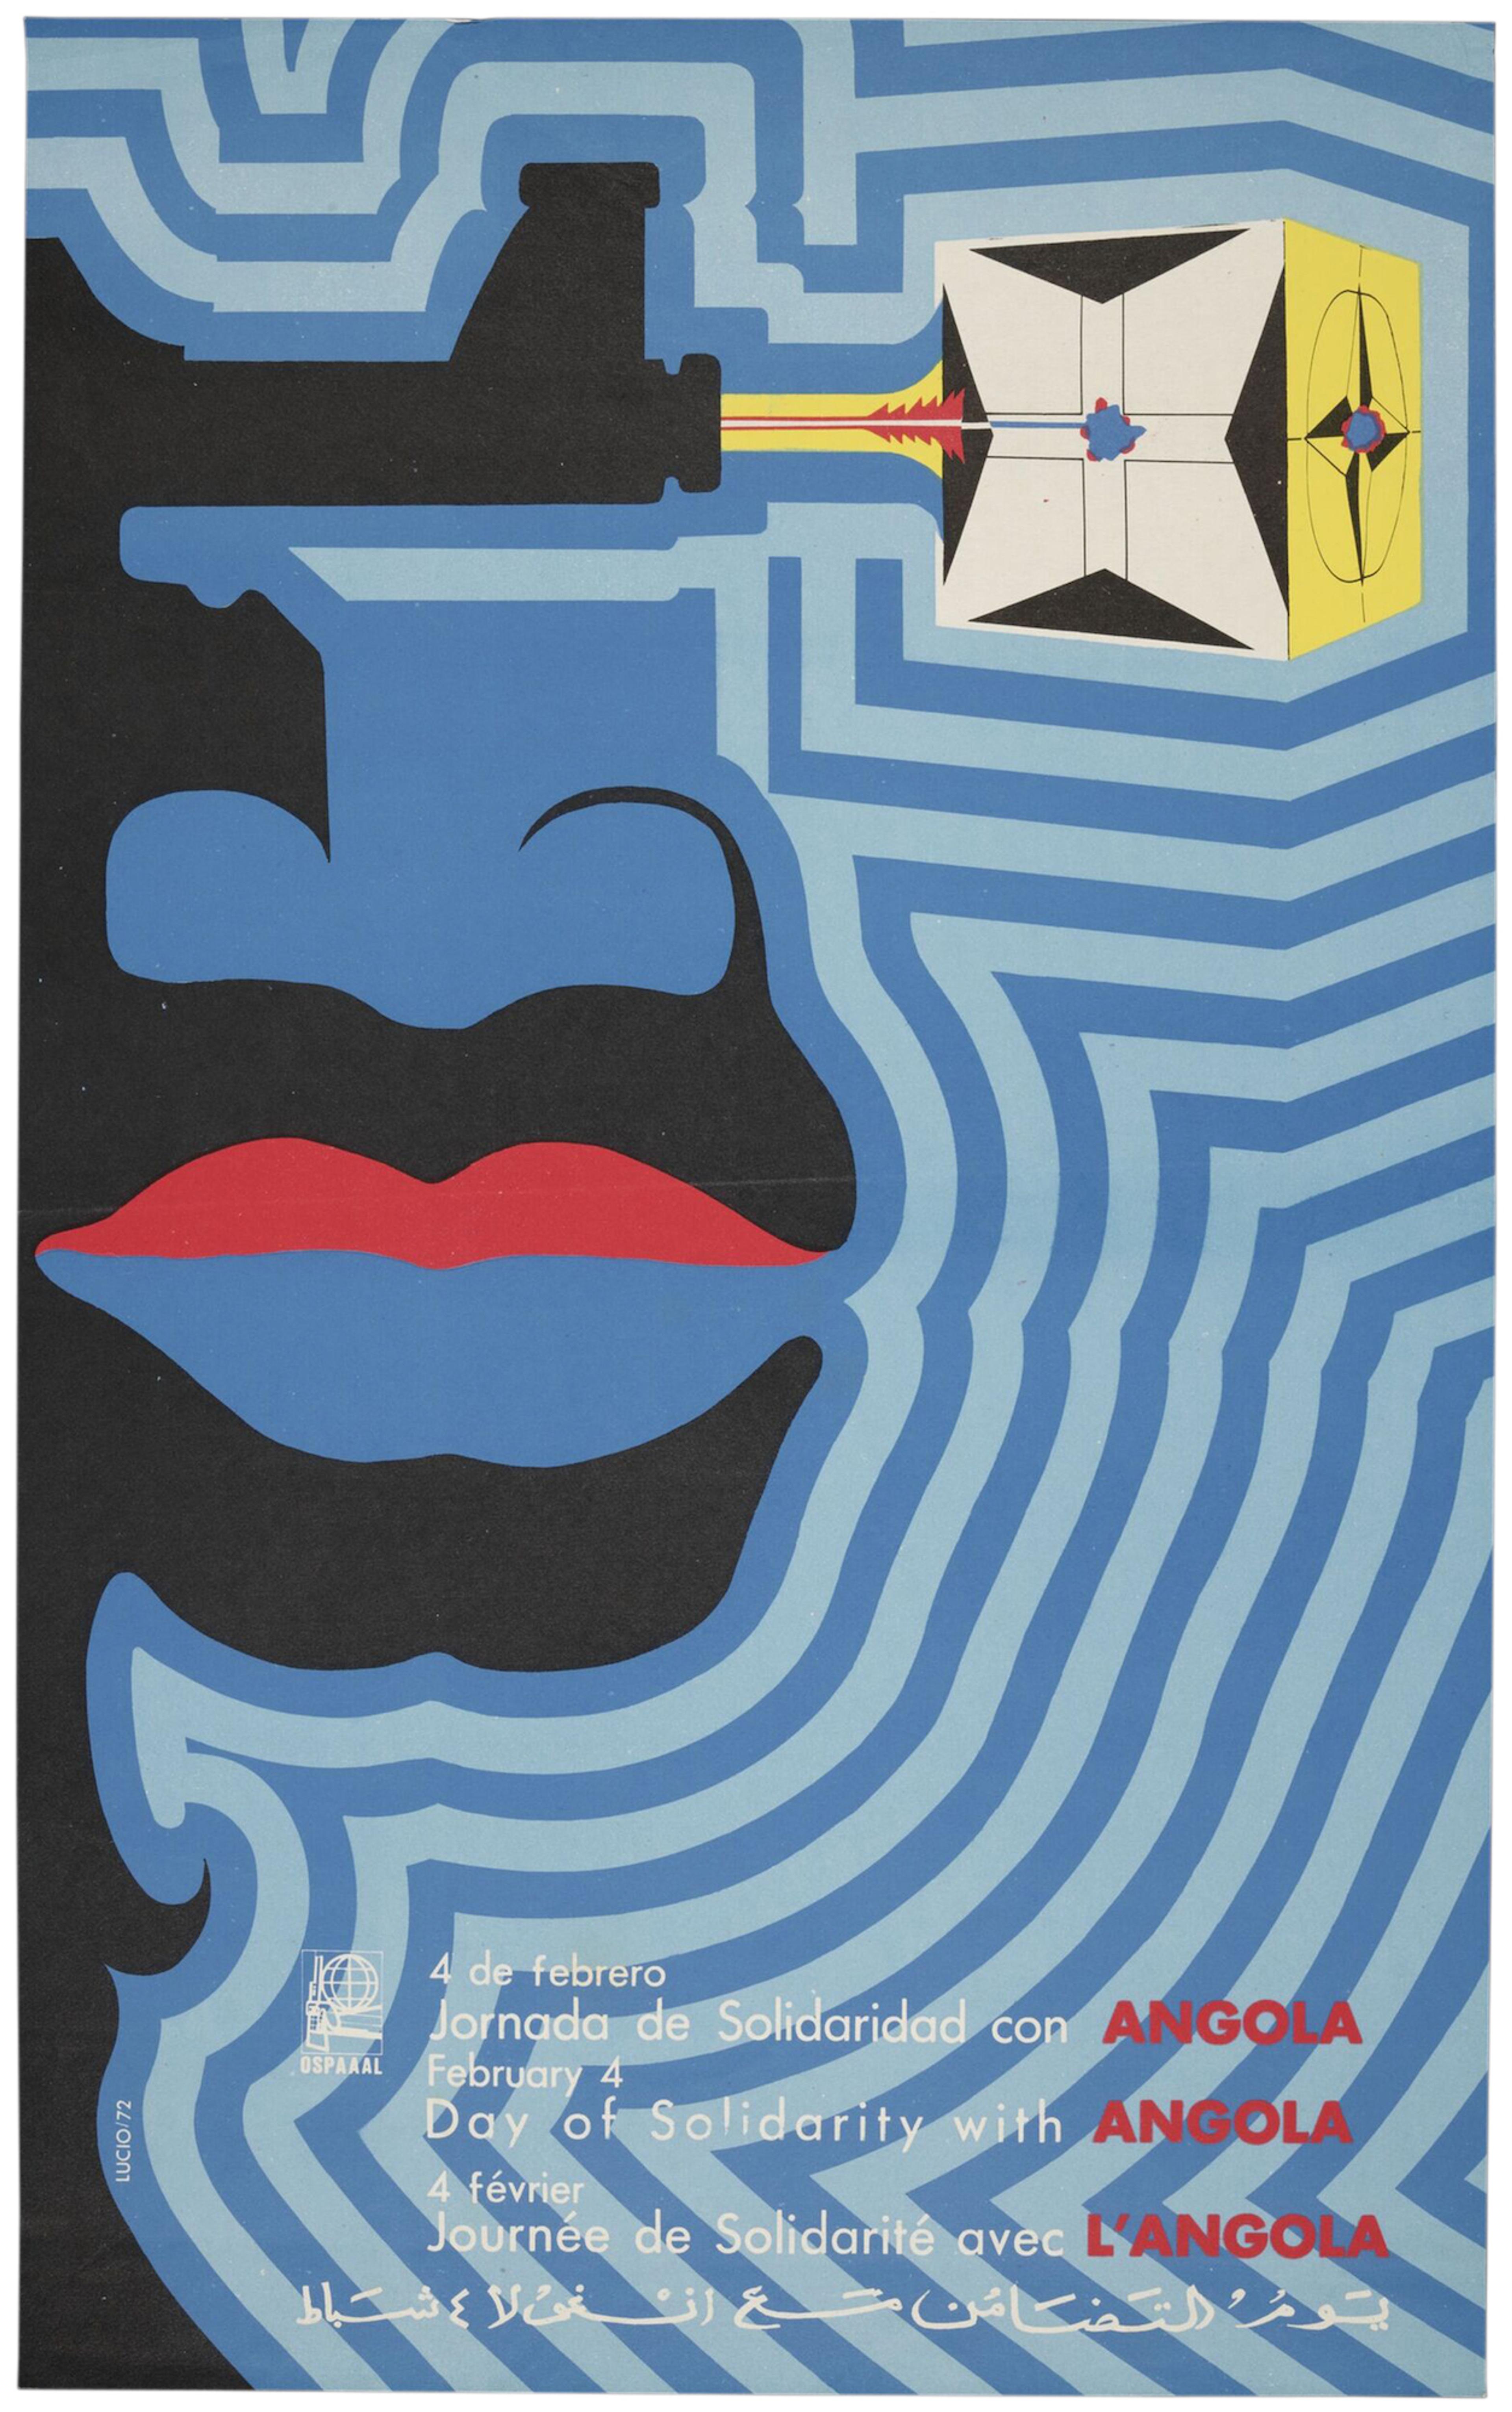 Colour lithograph poster depicting a face merging with a silhouette of a gun radiating blue lines. With title inscription in four languages (Spanish, French, English, Arabic).